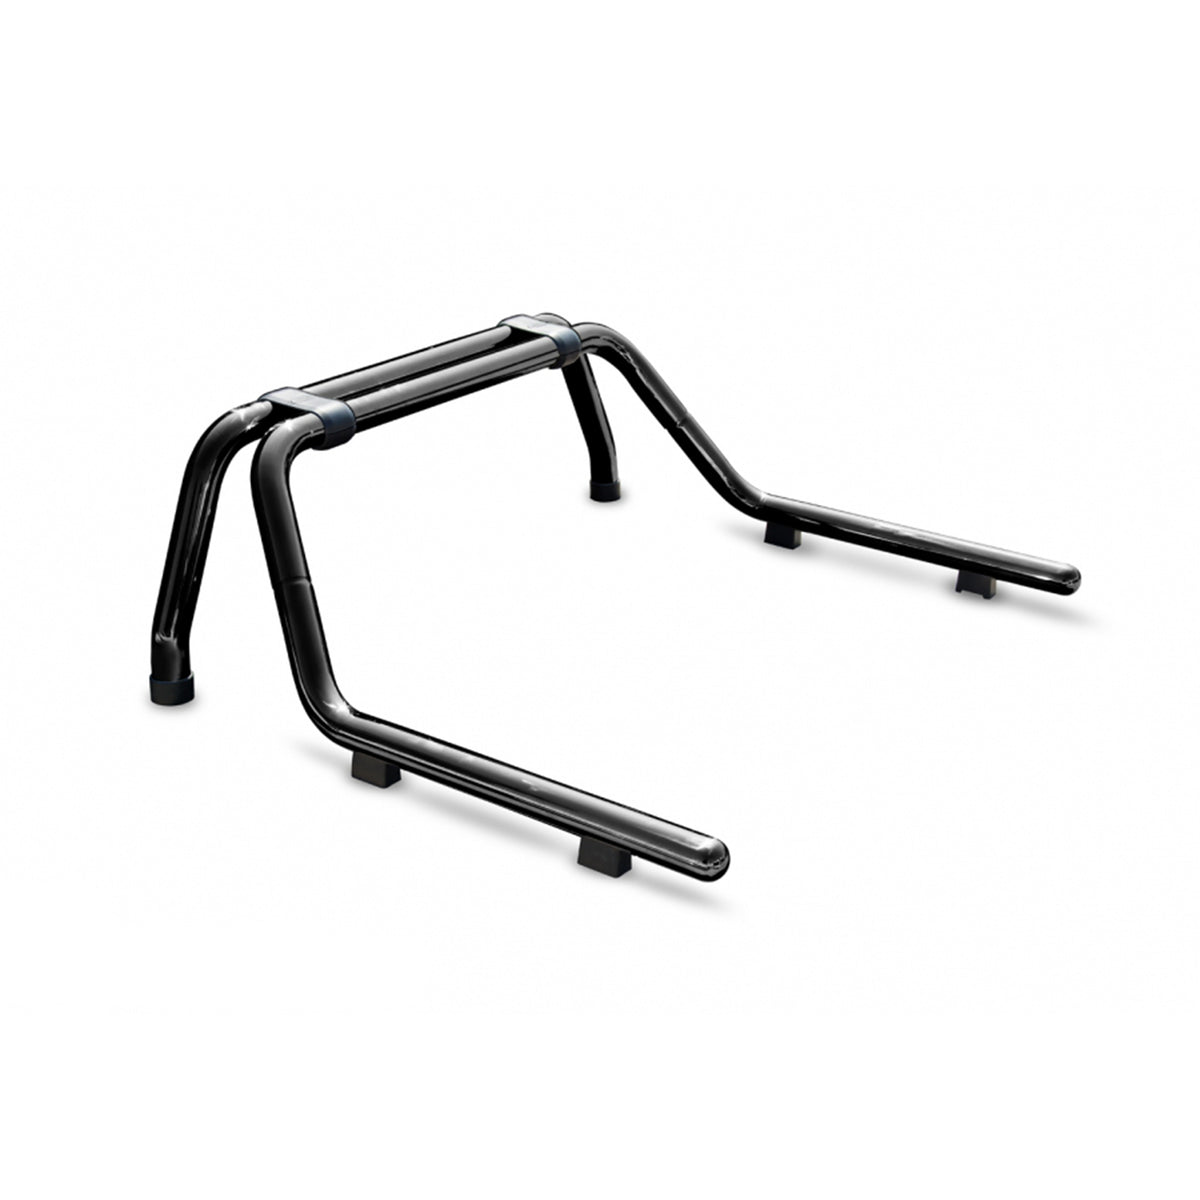 Roll bar rollable colored steel for Toyota Hilux 2006-2023 black Ø76mm